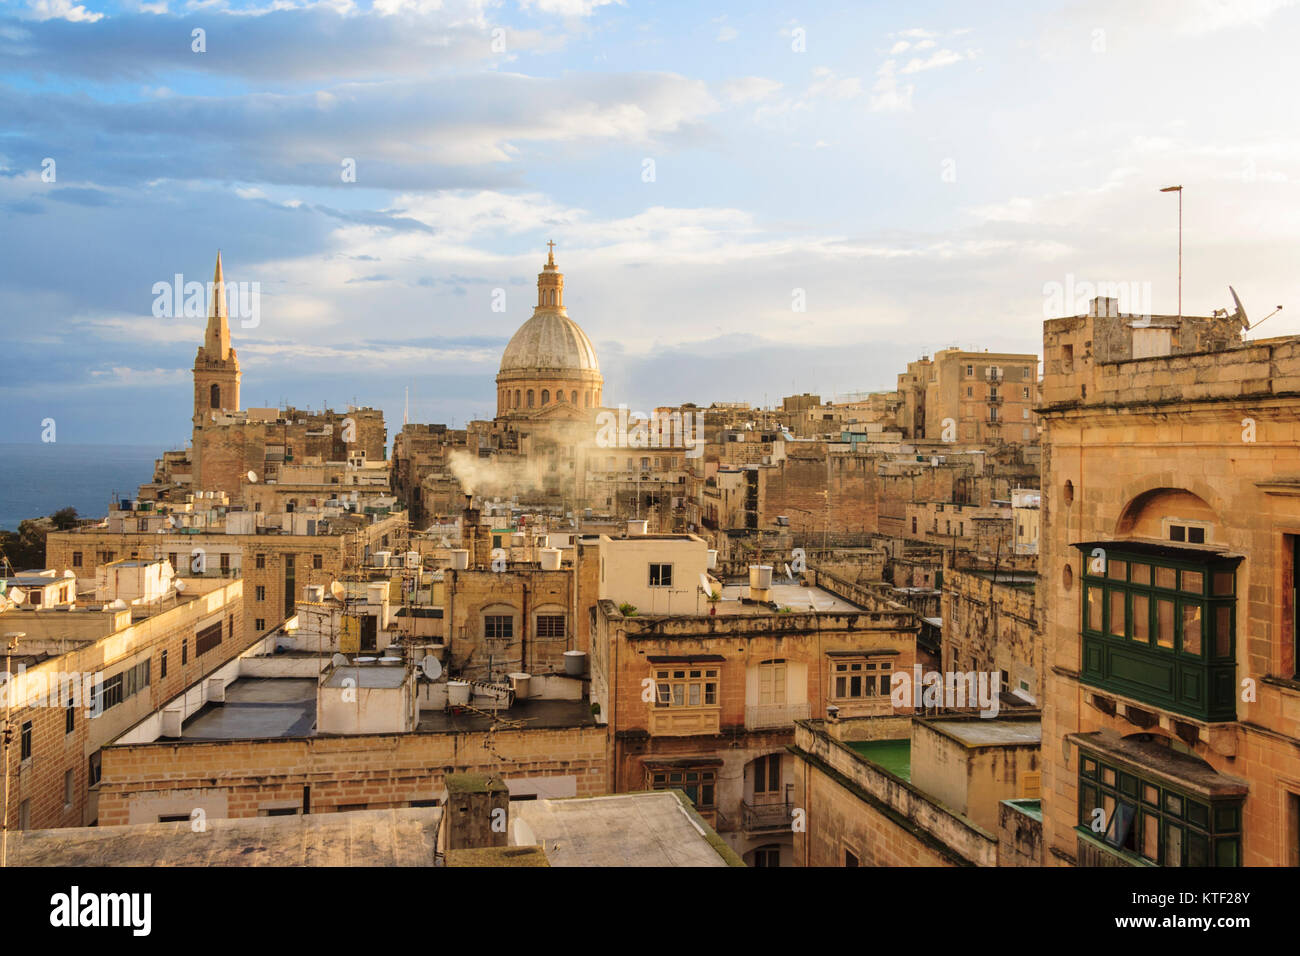 Overview at dawn of historic city of Valletta, Malta Stock Photo